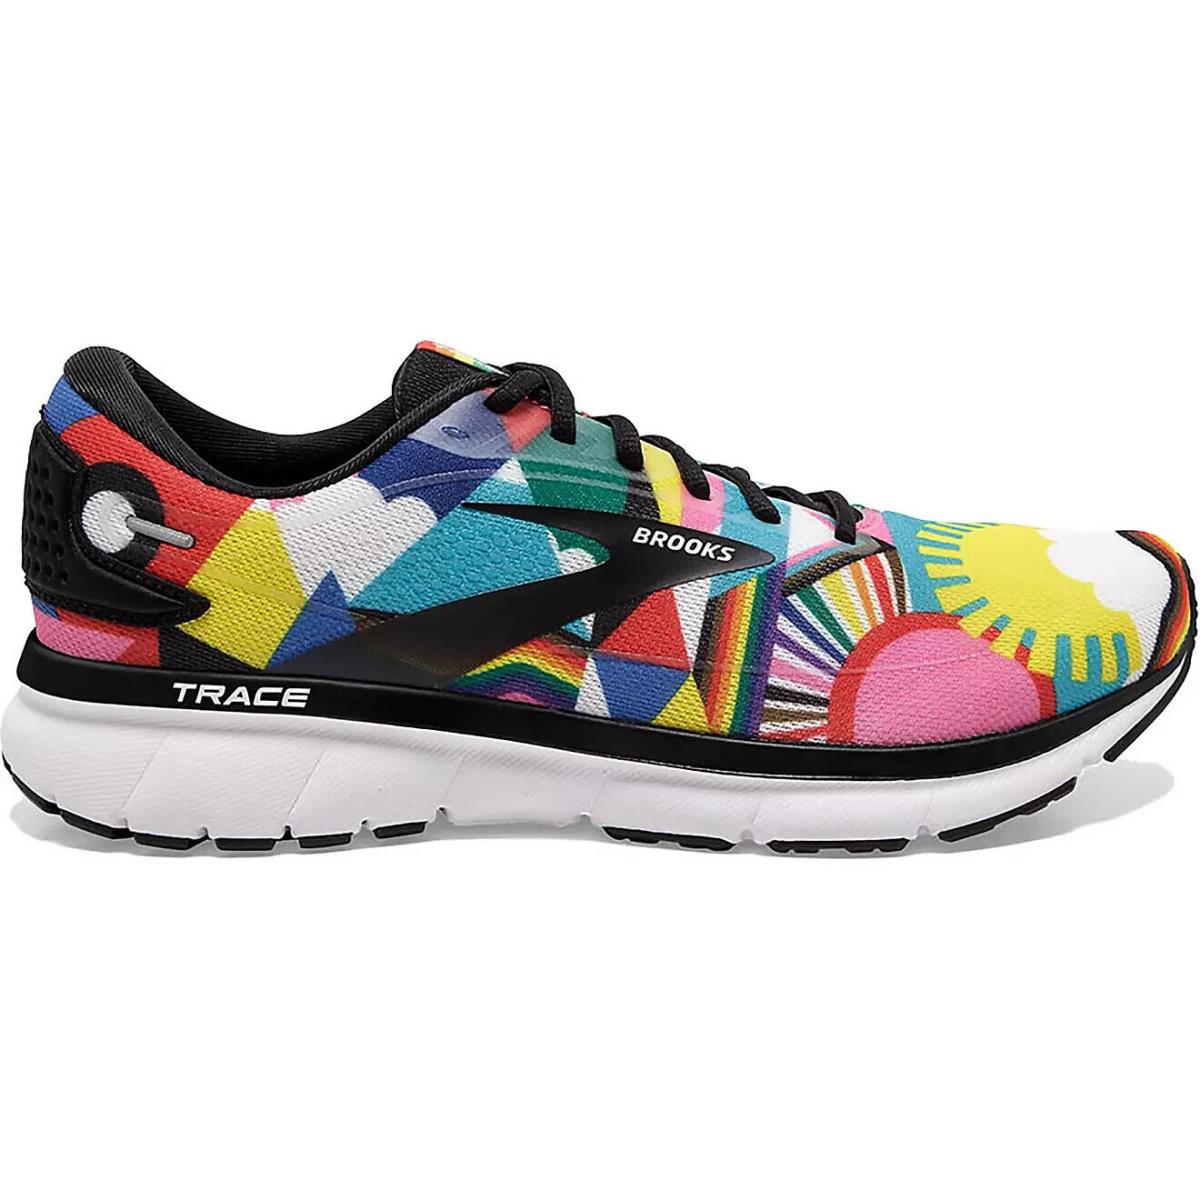 Brooks Trace 2 110388-1D-074 Mens Multicolor Proud Running Sneakers Shoes NR2894 - Multicolor